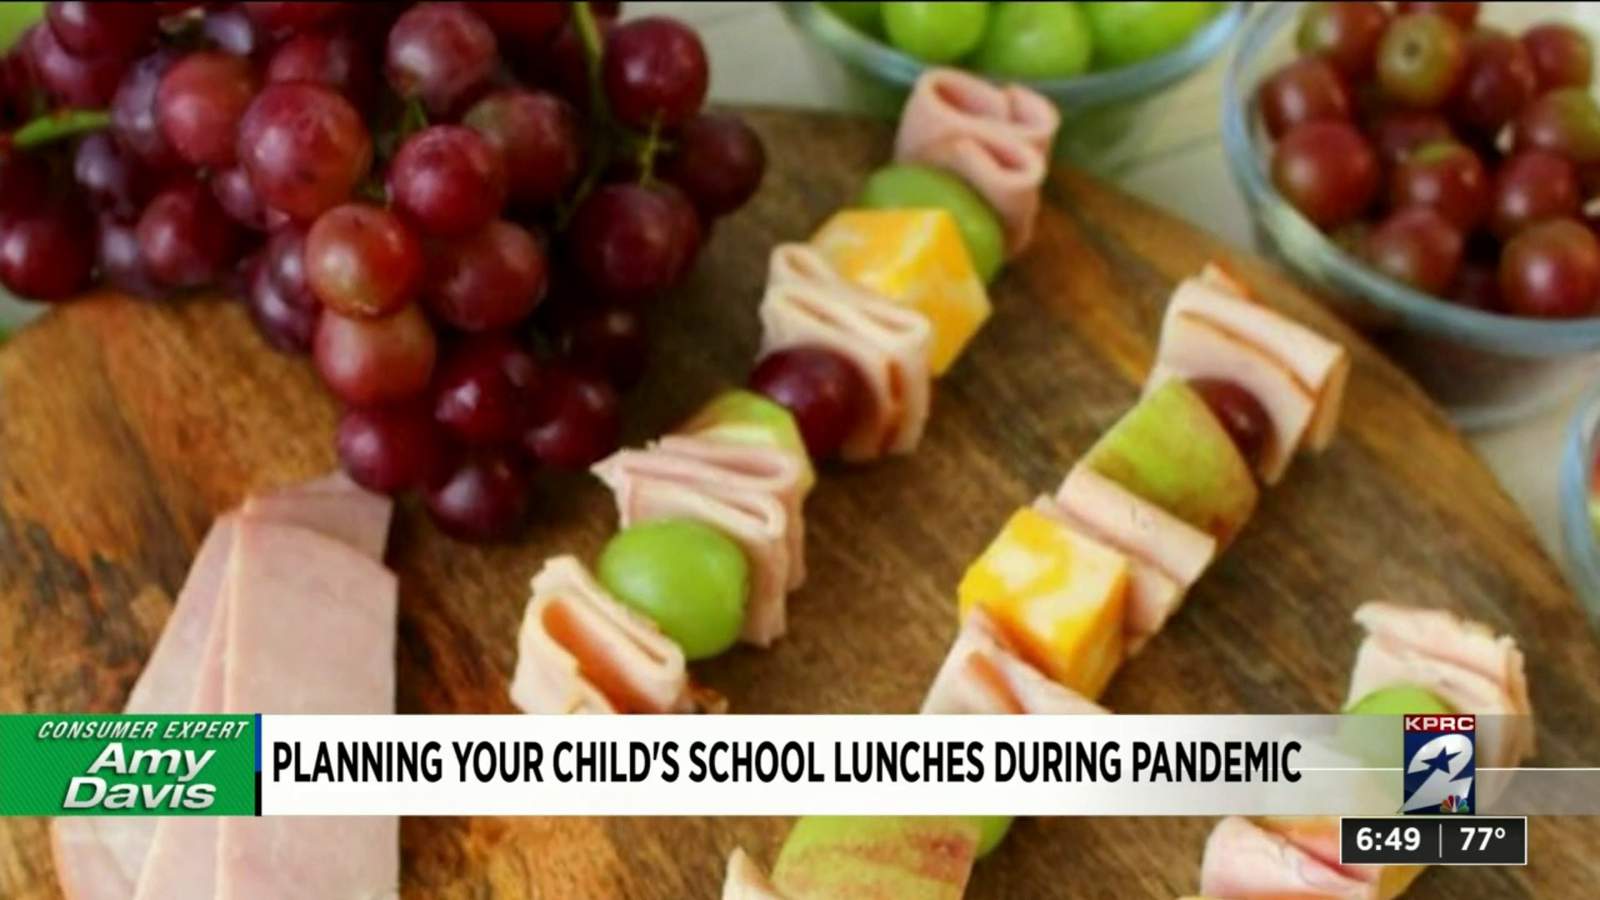 Here are some Back 2 School lunch planning ideas for in-person and virtual learning